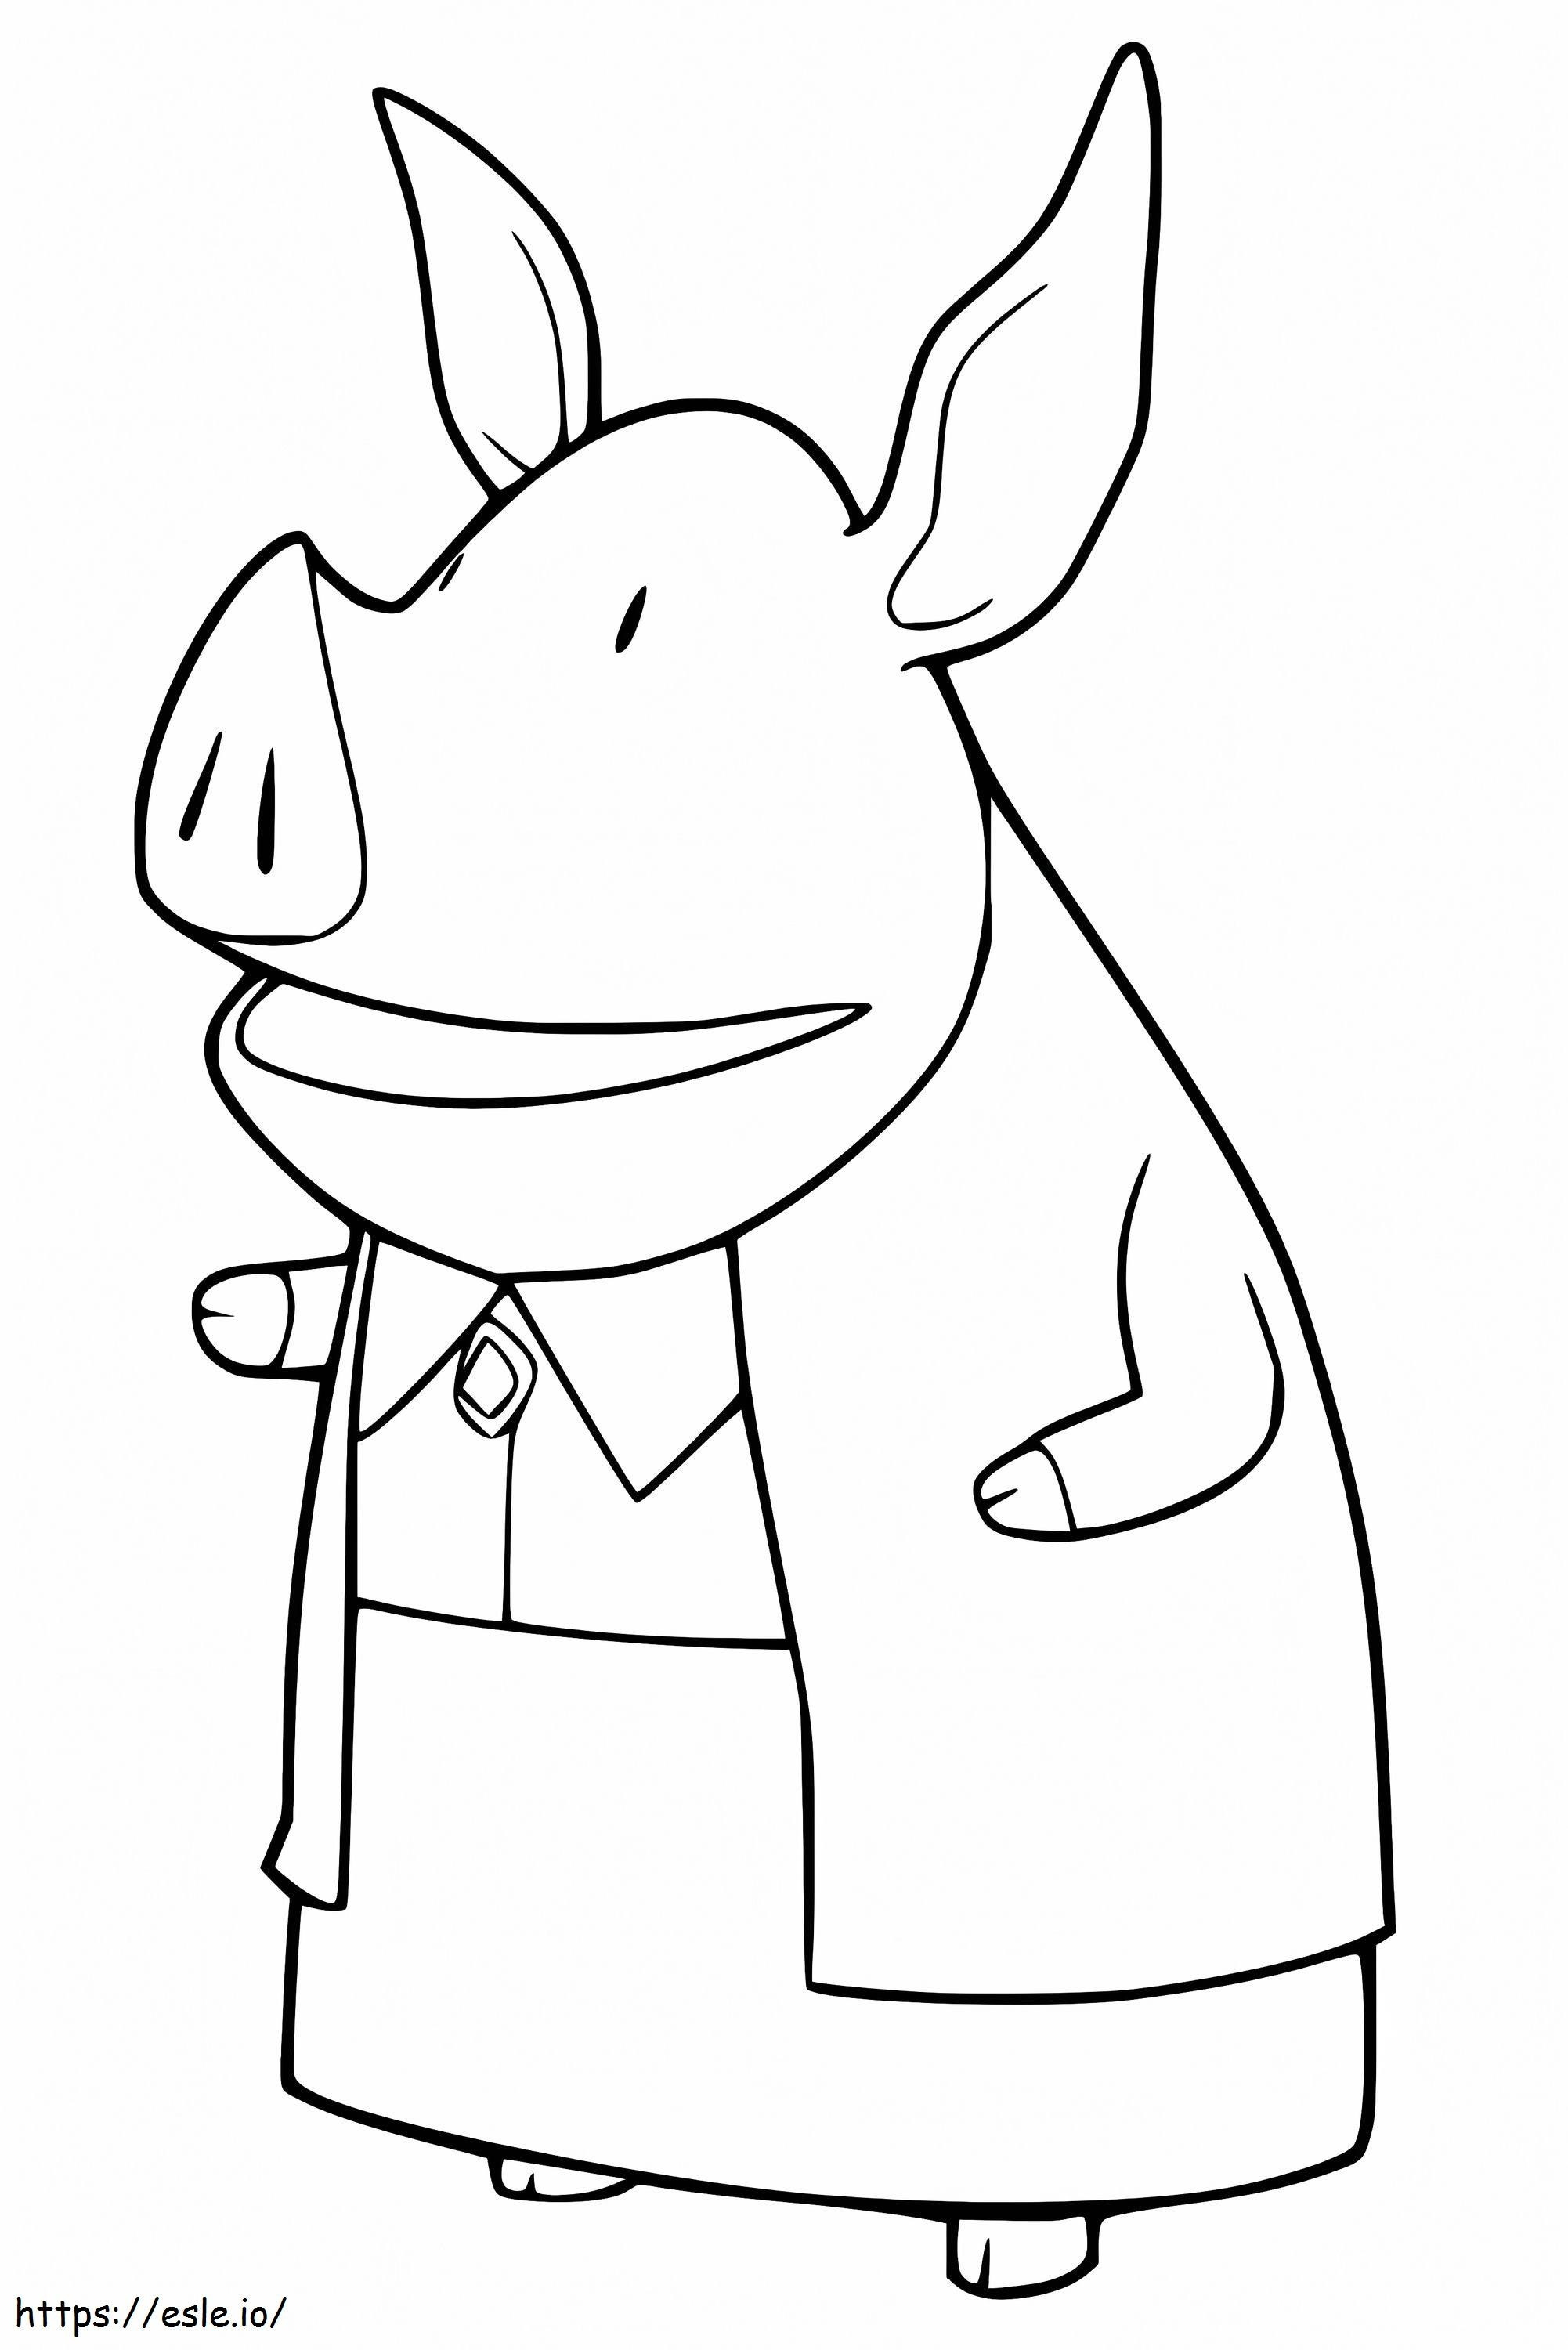 Mrs Hoggenmuller coloring page